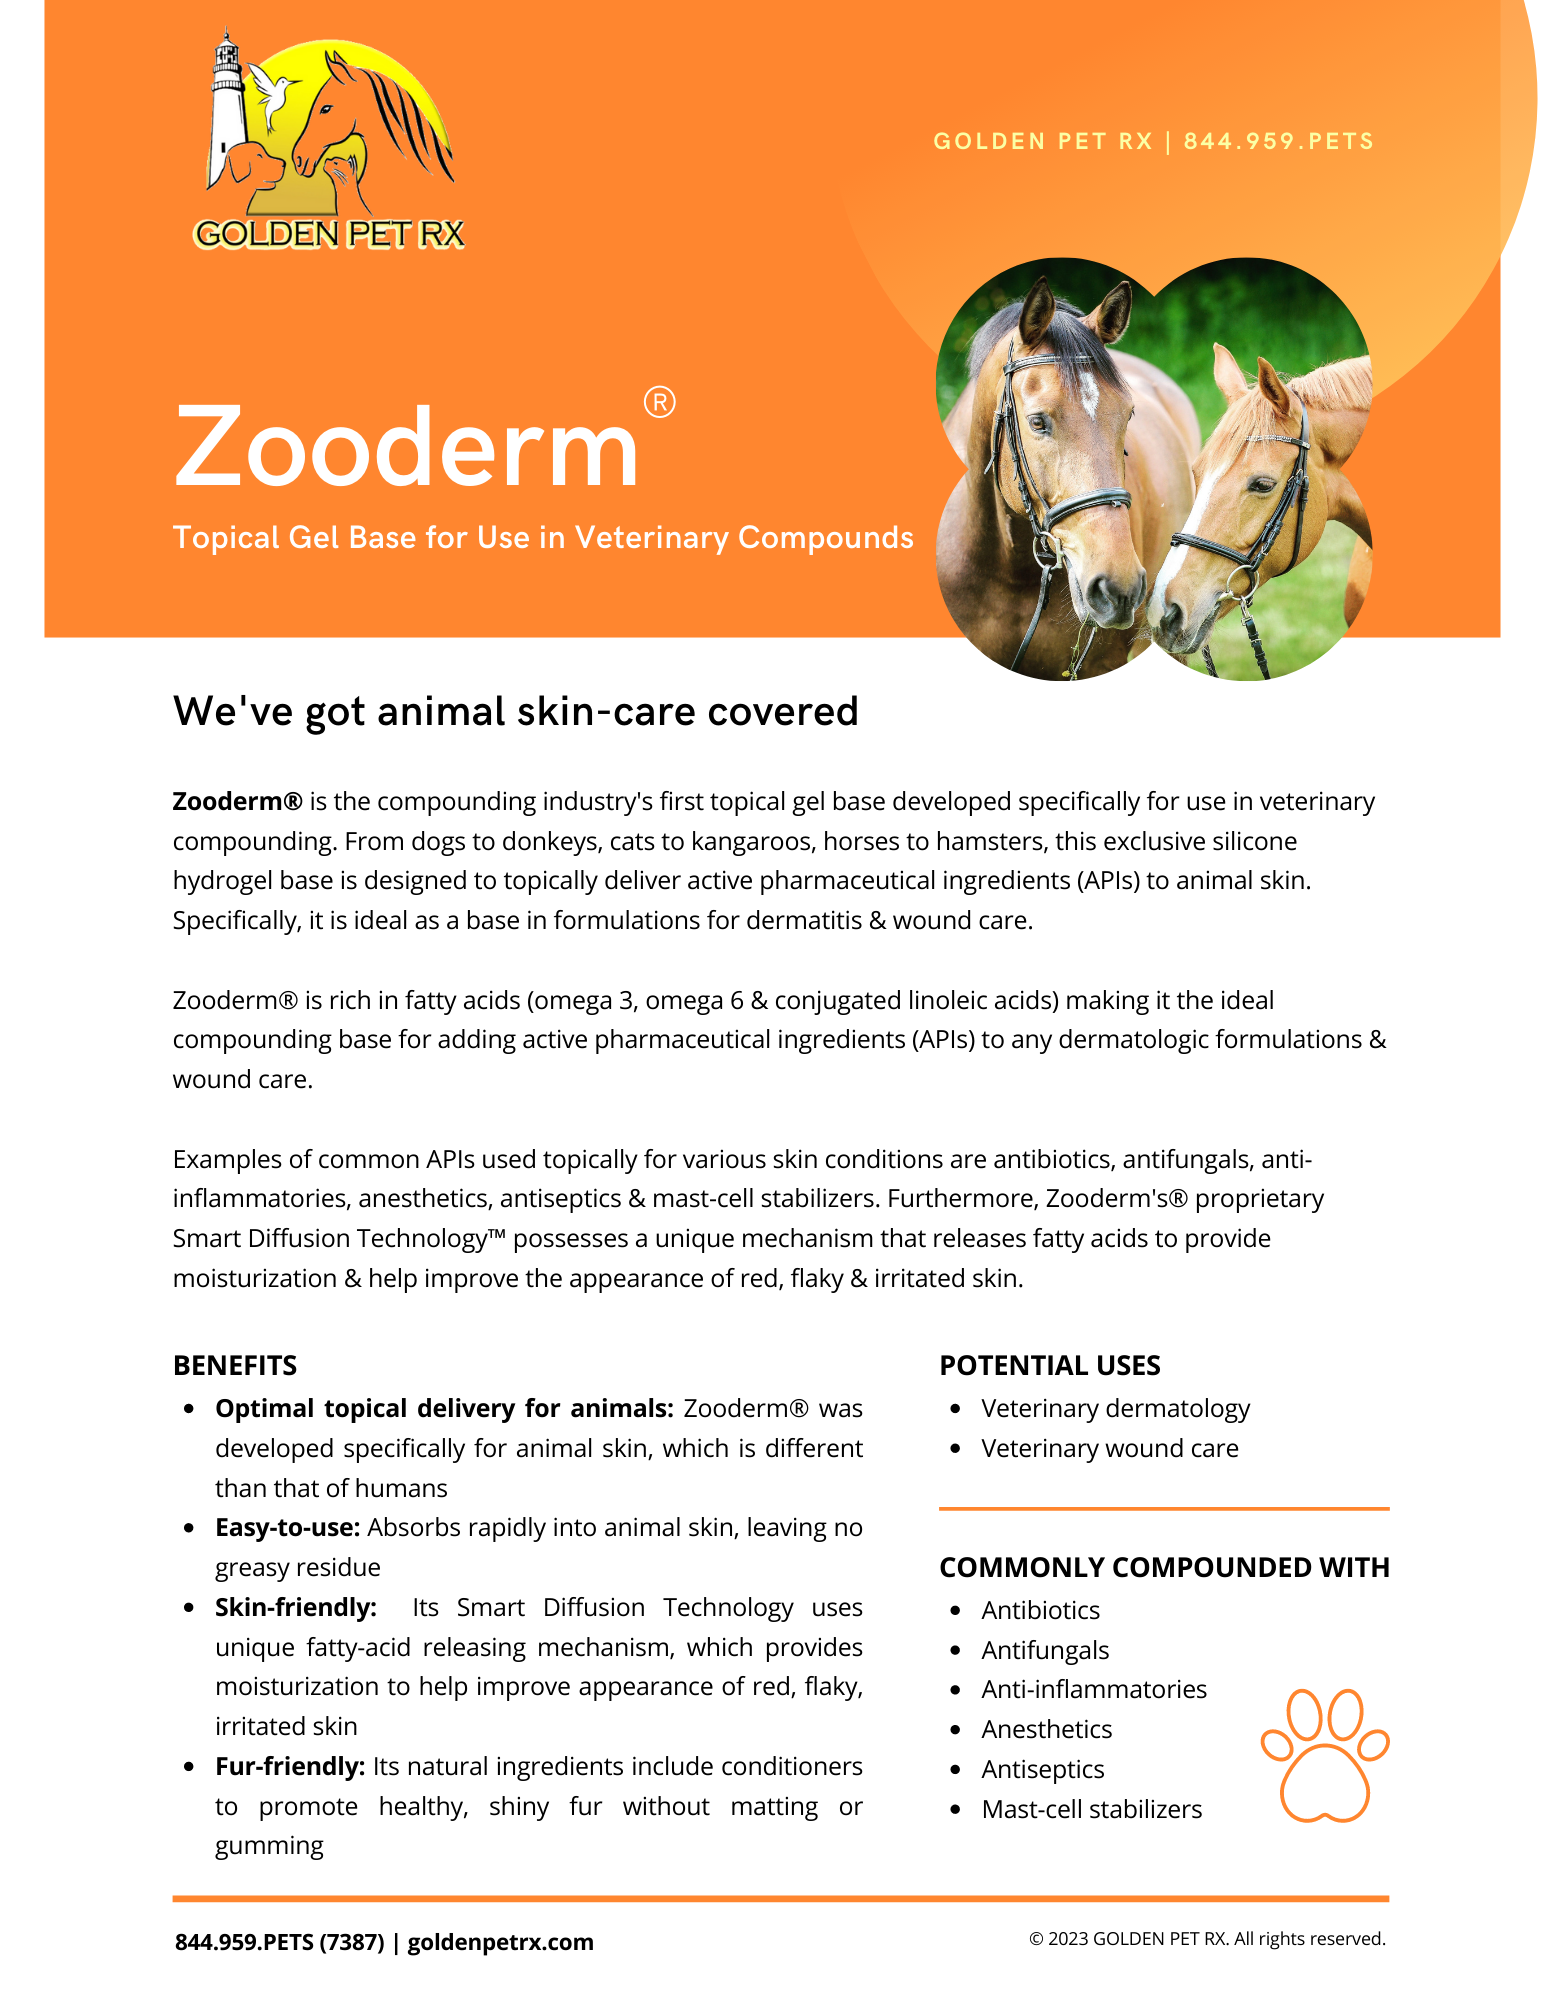 Copy of GPRx.Zooderm.info (1).png